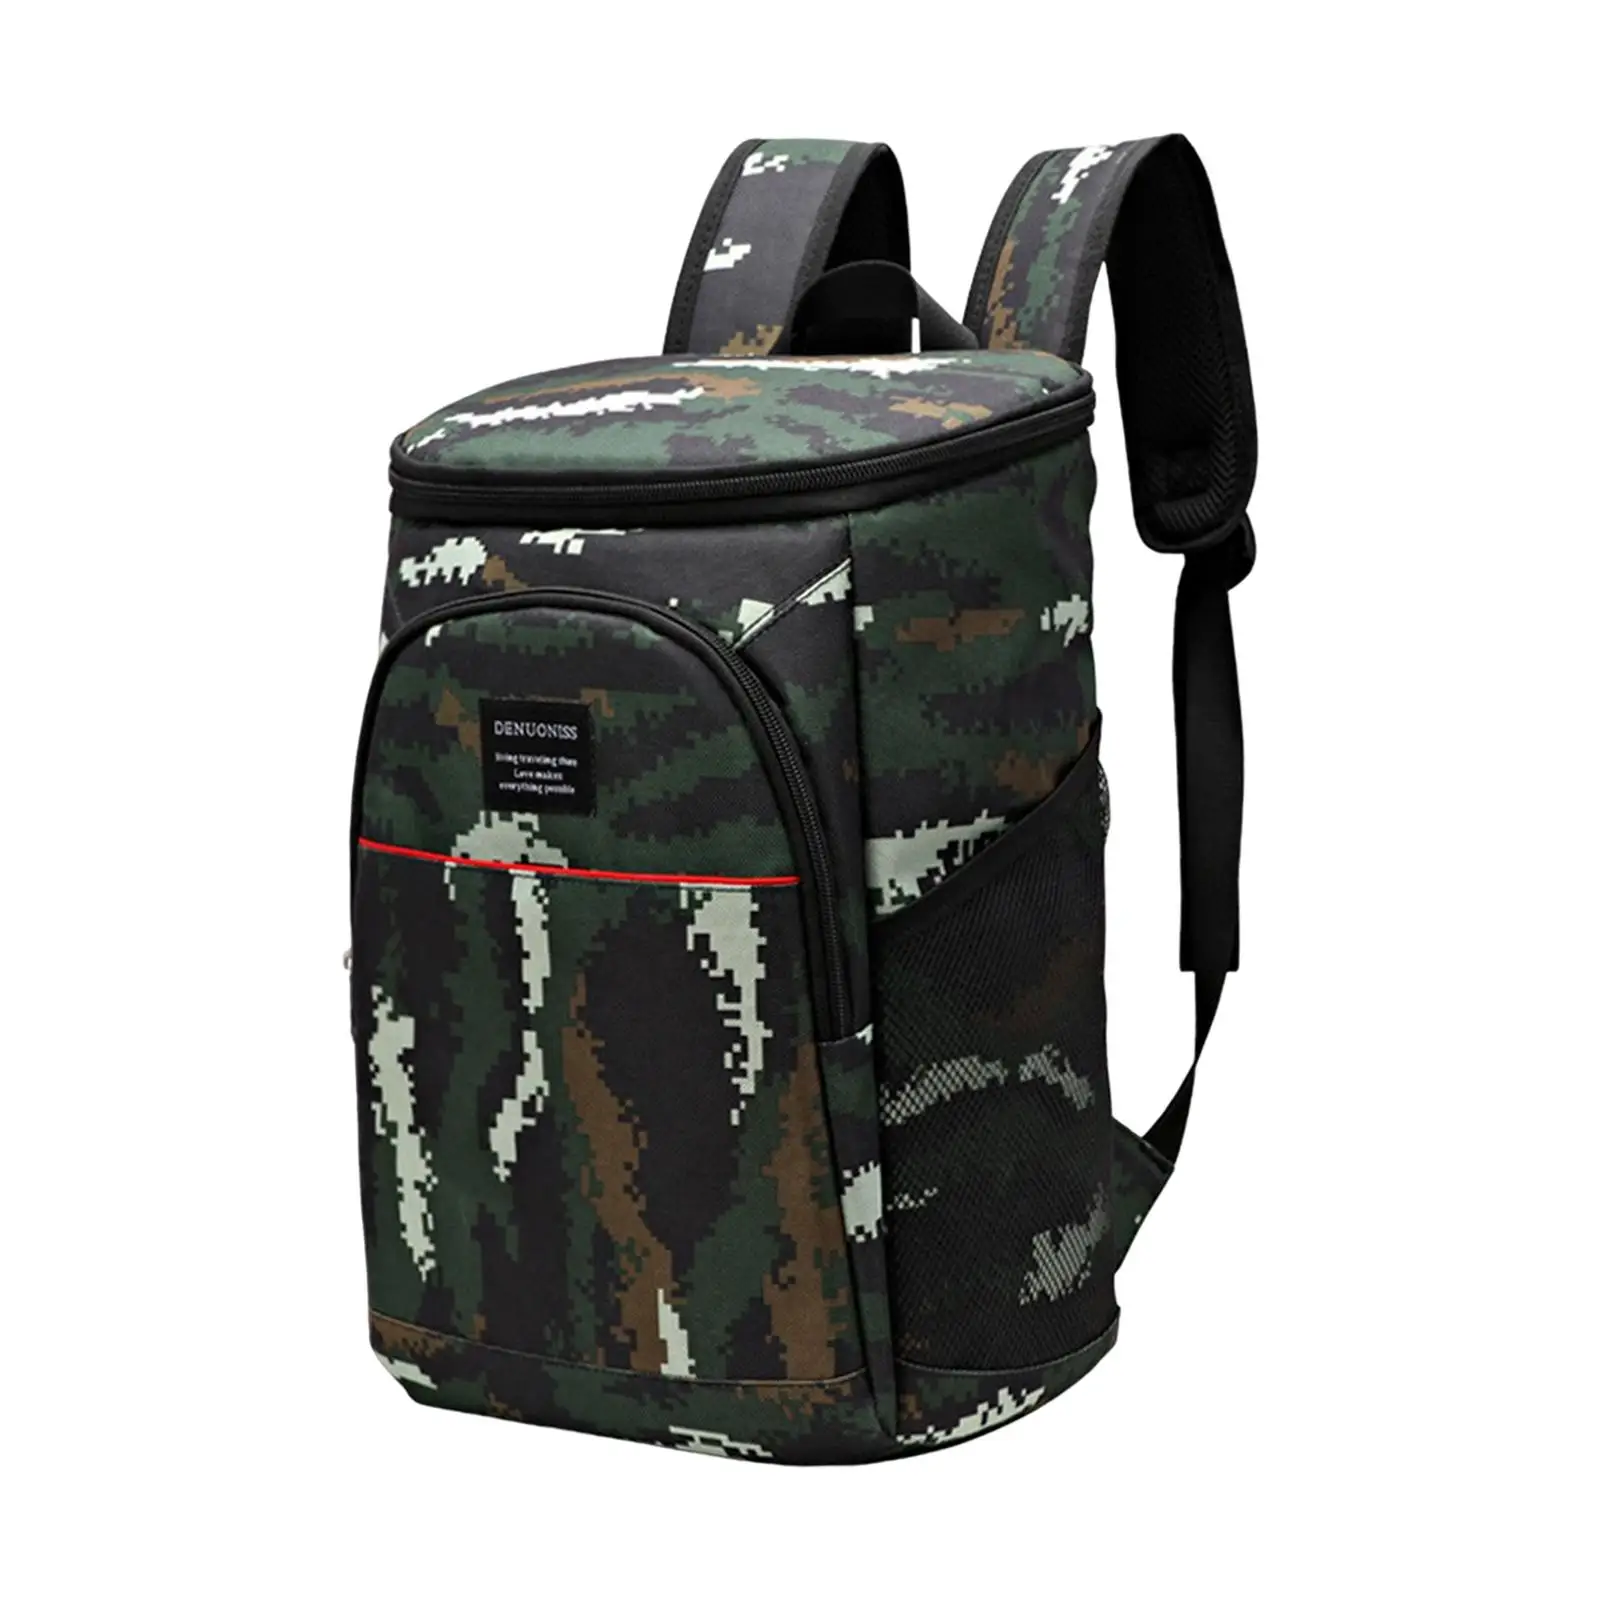 Backpack Picnic Bag Insulated Bag Thermal Bag for Cold and Hot Food for Picnic